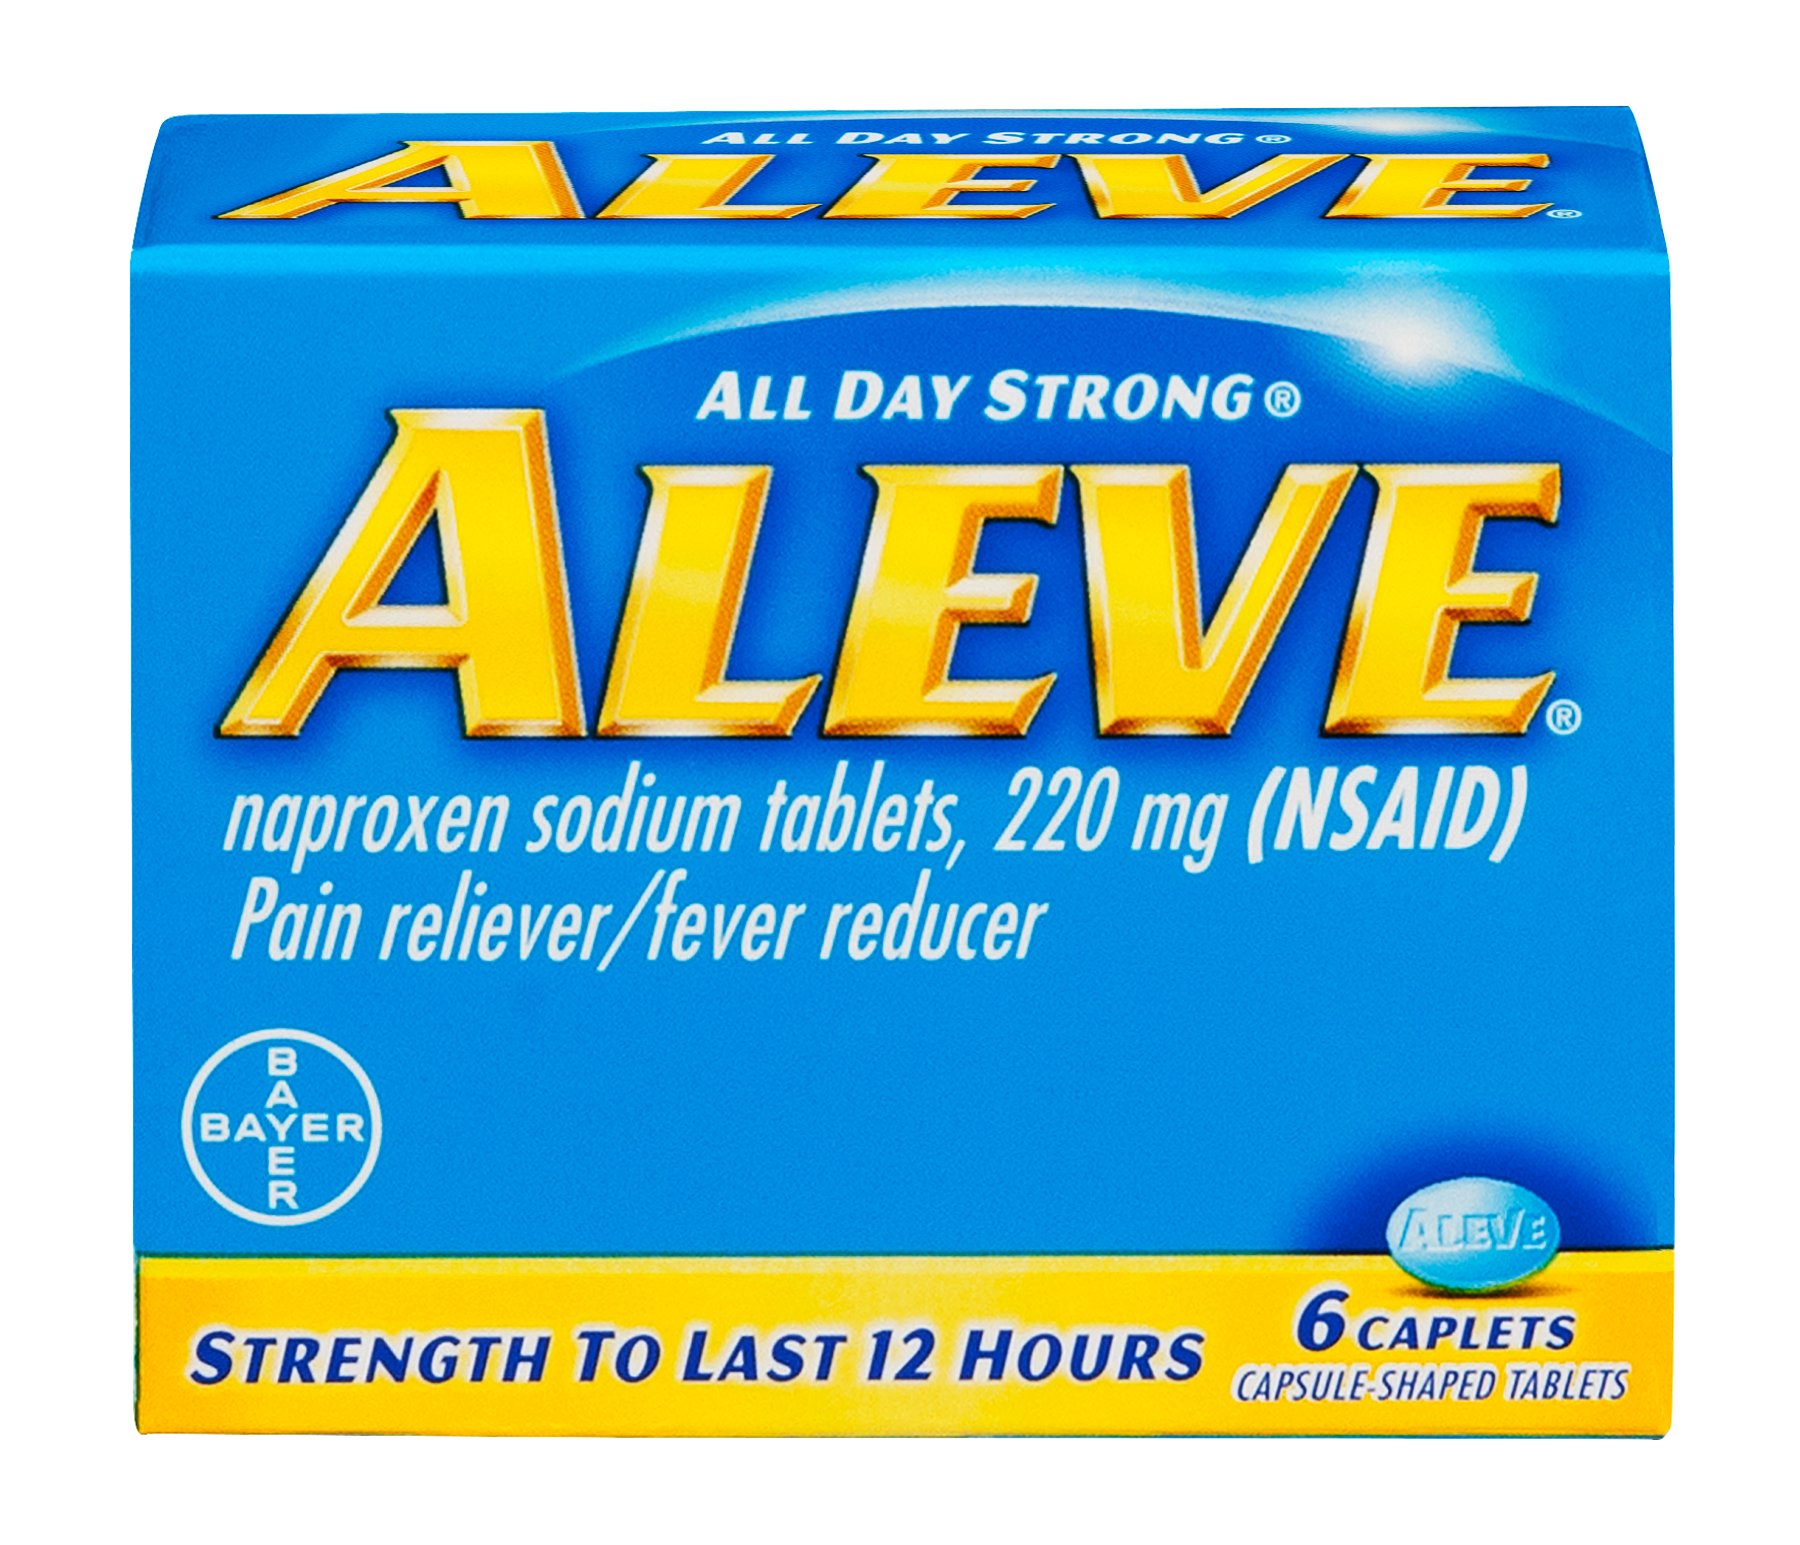 Aleve Pain Reliever/Fever Reducer Naproxen 220 mg Caplets ...